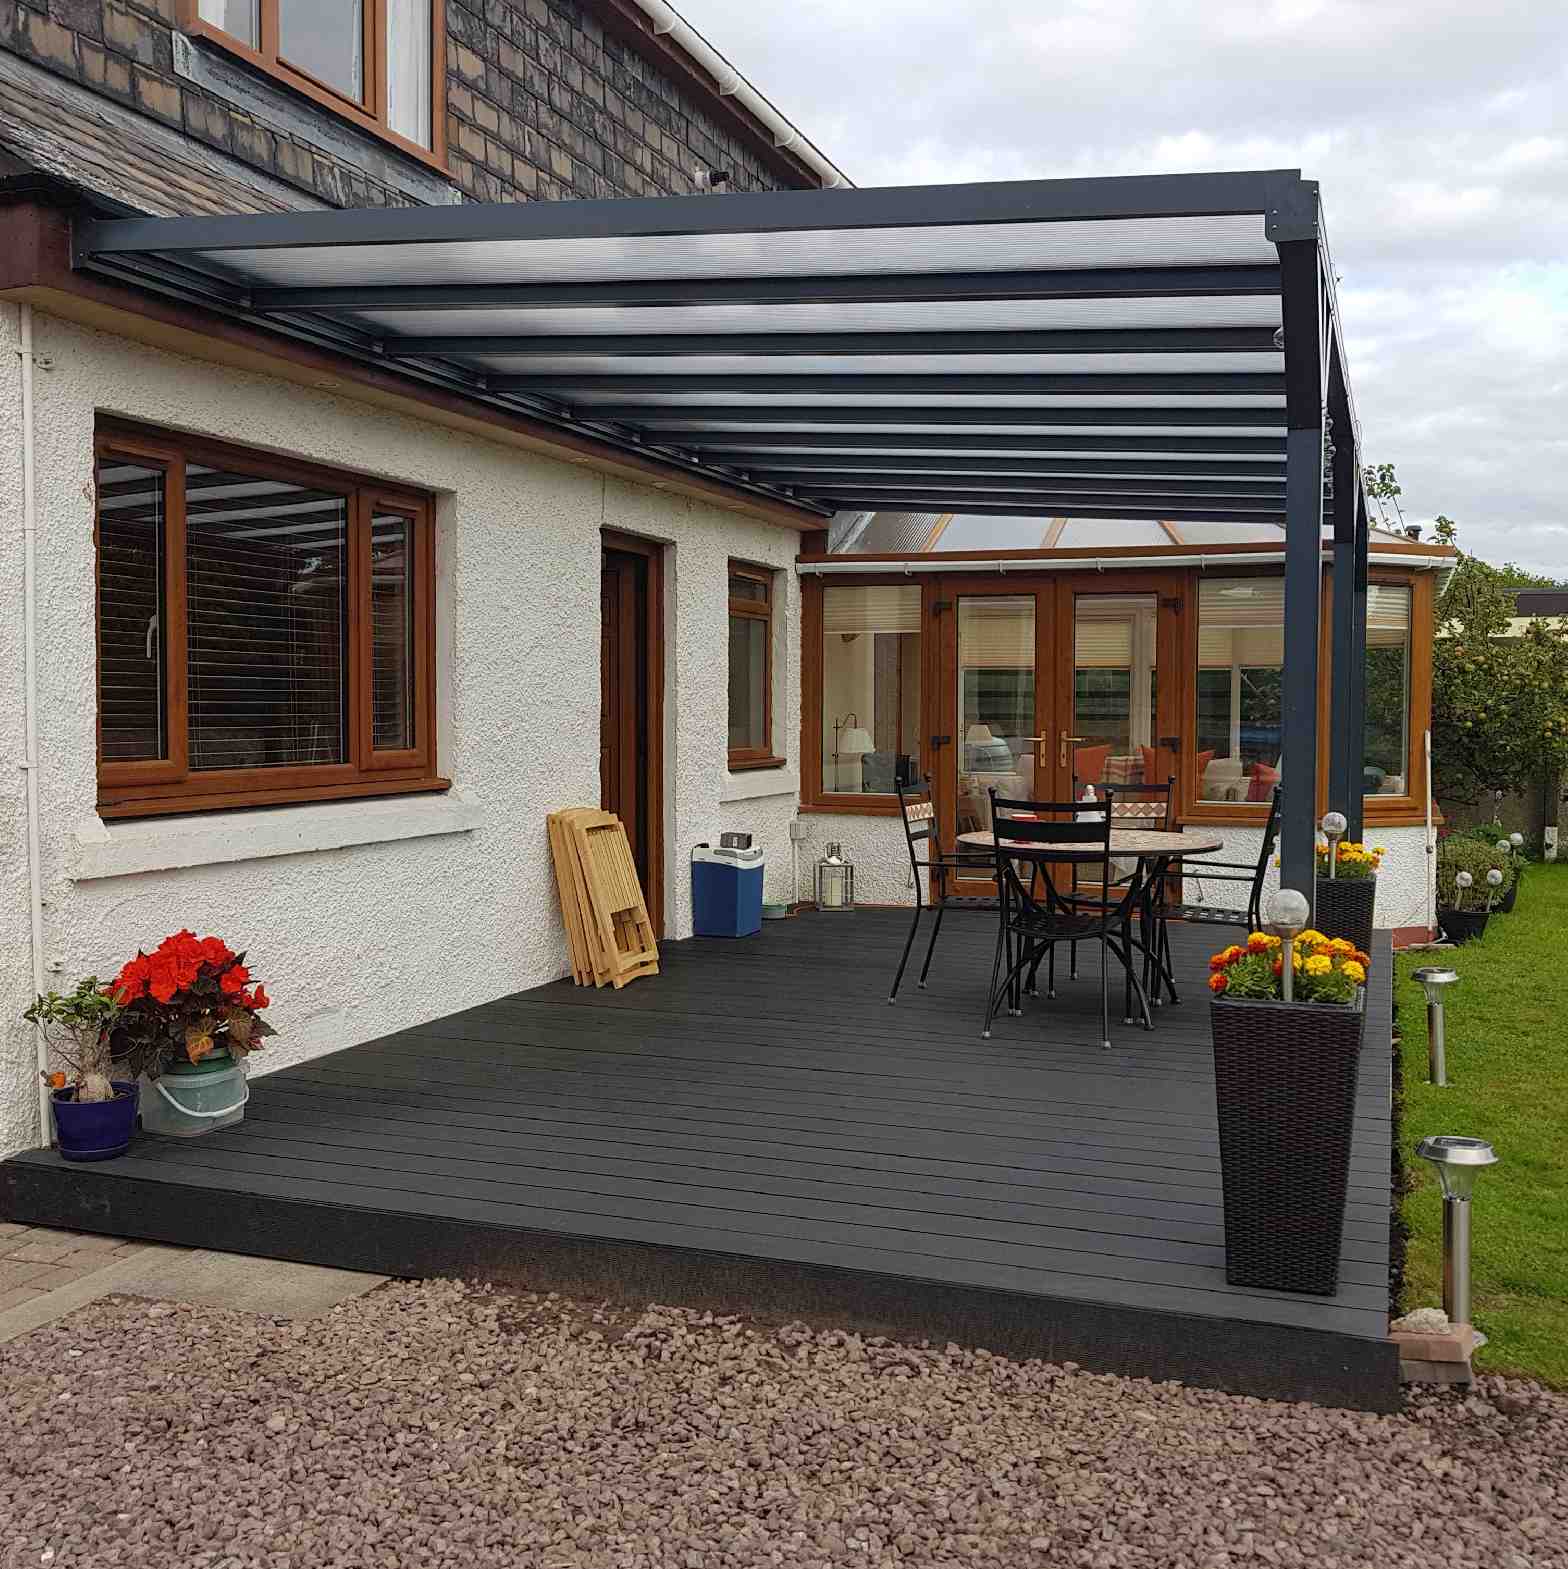 Buy Omega Verandah, Anthracite Grey, 16mm Polycarbonate Glazing - 7.4m (W) x 2.0m (P), (4) Supporting Posts online today